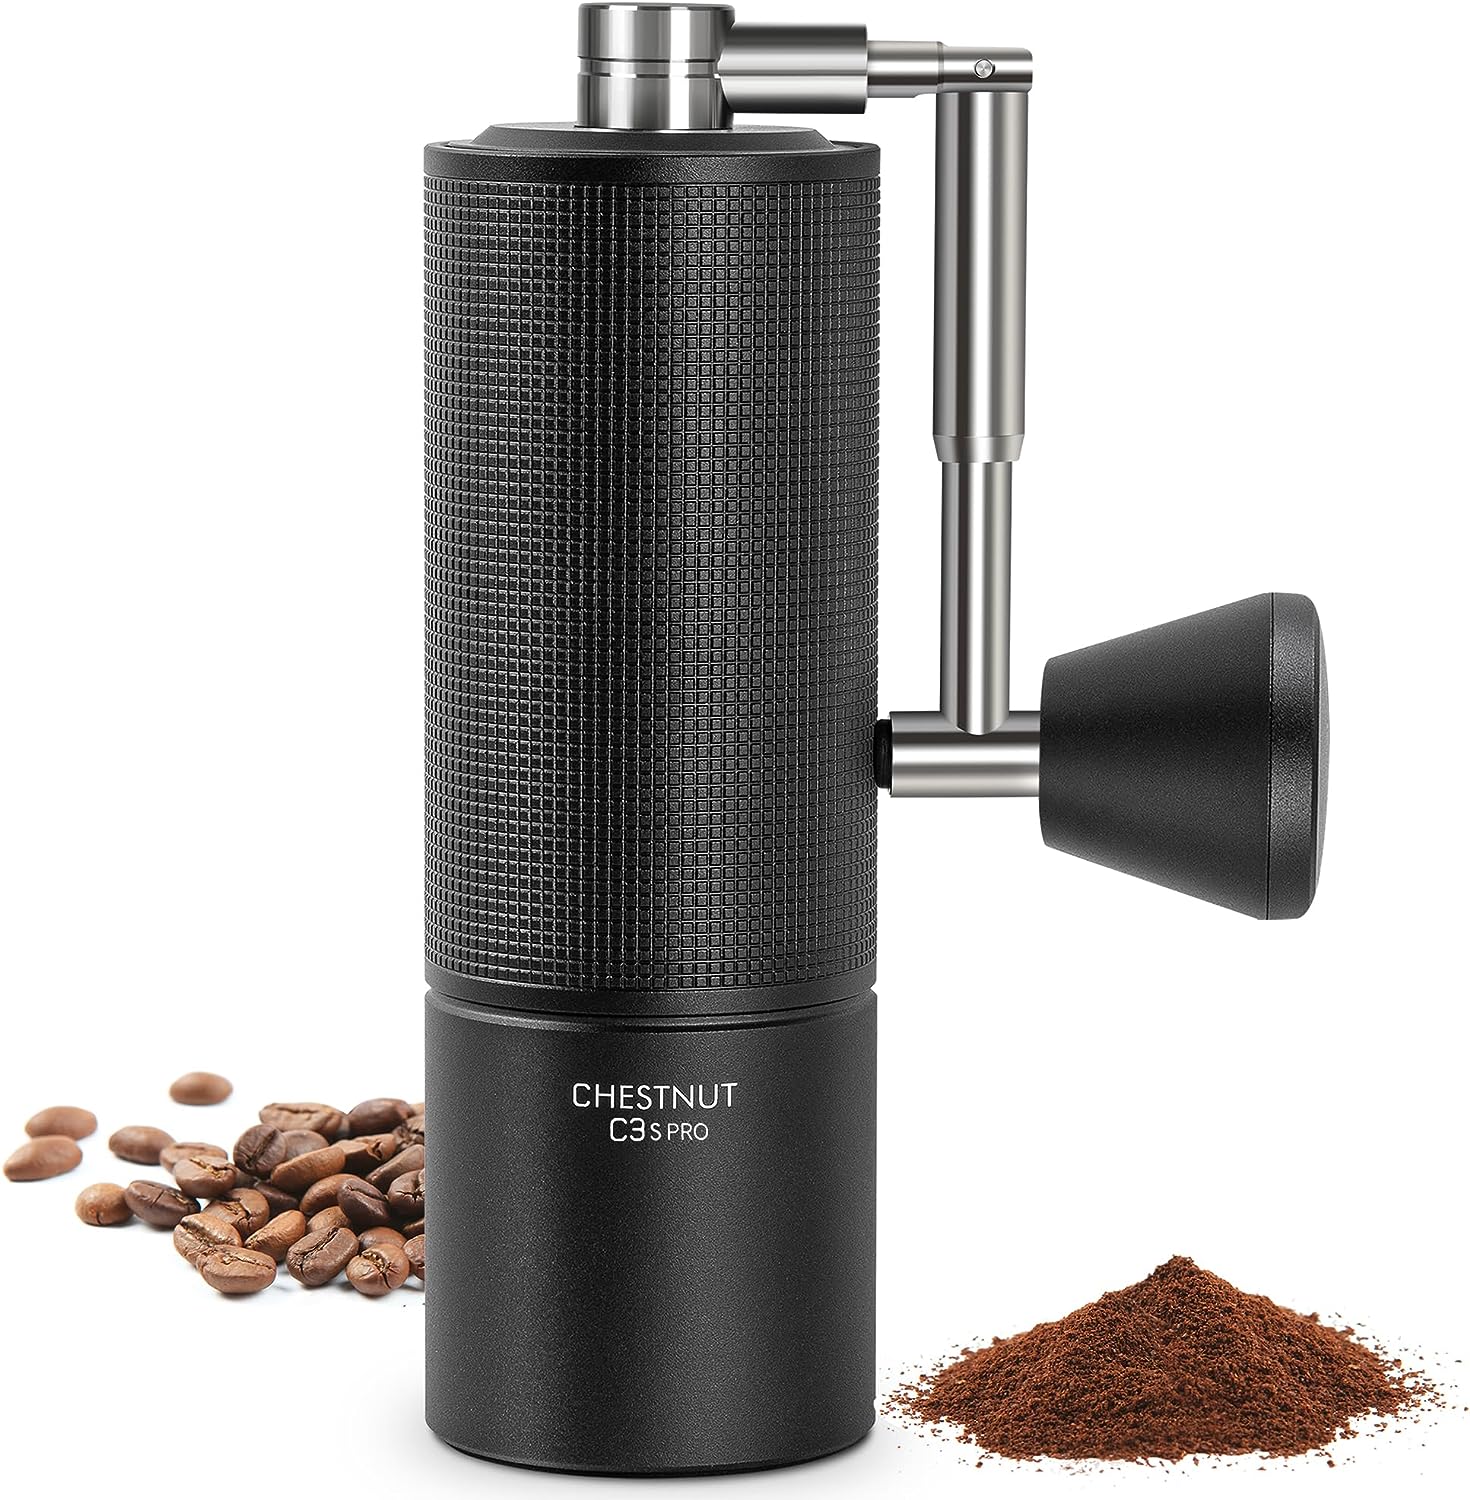 TIMEMORE Chestnut C3s PRO Manual Coffee Grinder, Upgrade Integrated All-Metal Housing, Hand Coffee Grinder with Folding Handle, for Espresso to French Press - Black